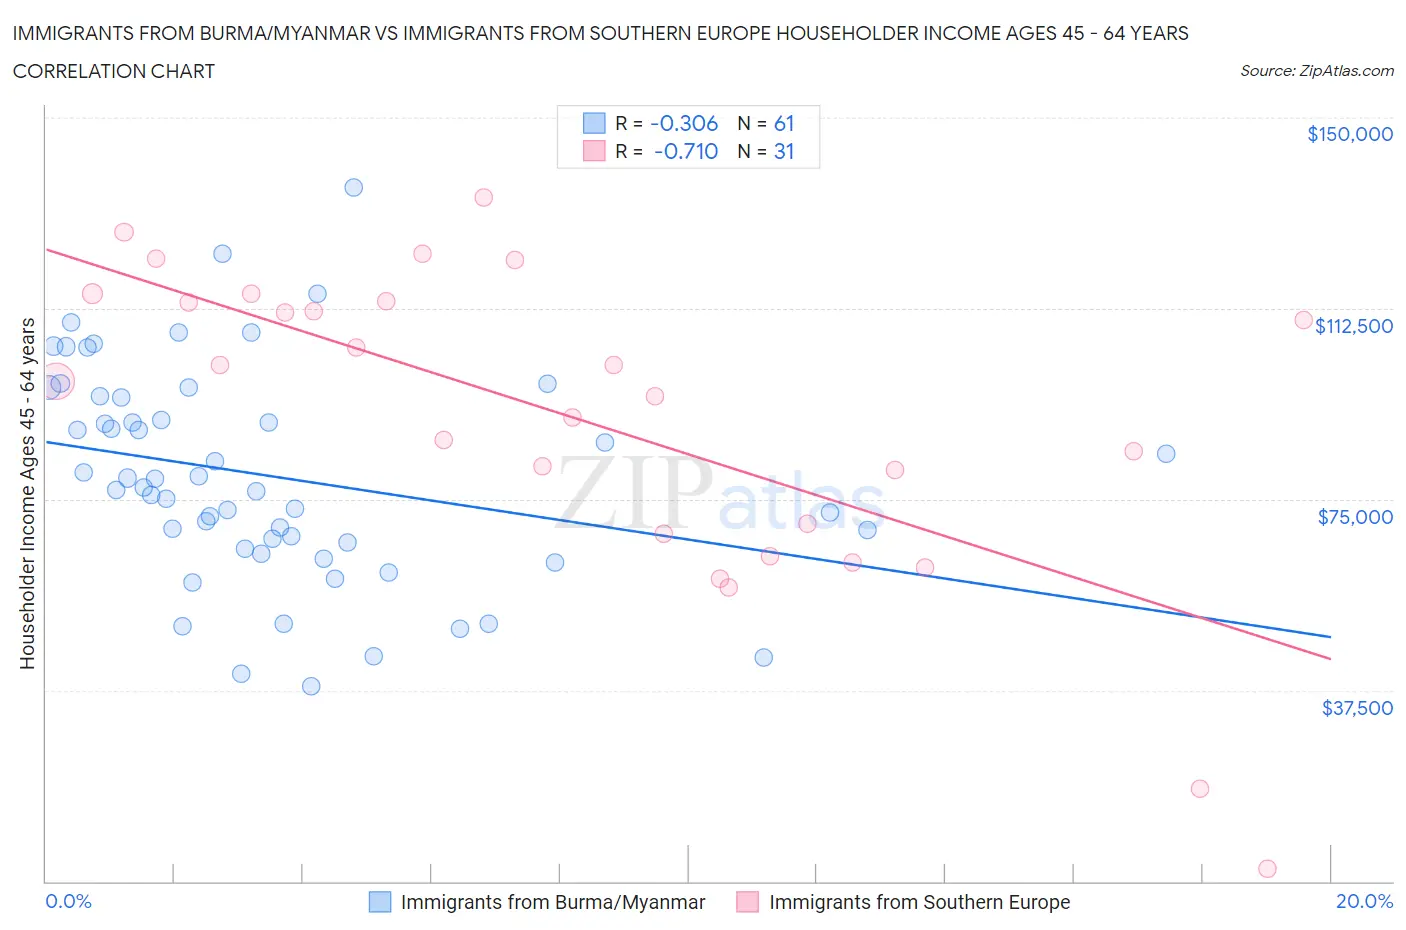 Immigrants from Burma/Myanmar vs Immigrants from Southern Europe Householder Income Ages 45 - 64 years